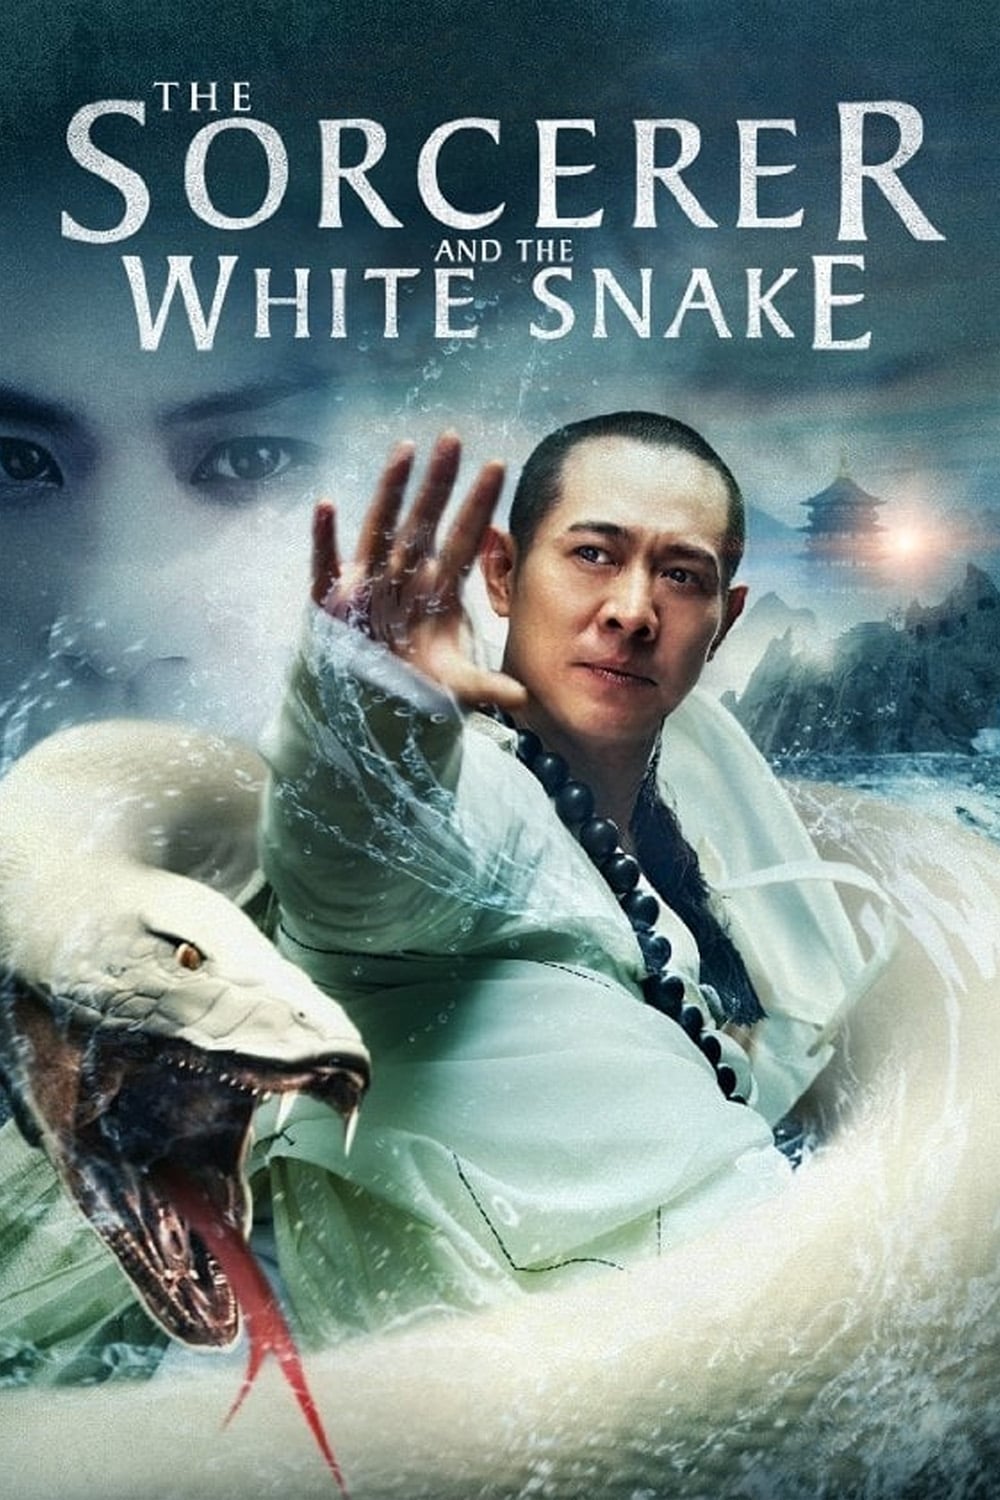 The Sorcerer and the White Snake [Sub-ITA] (2011)